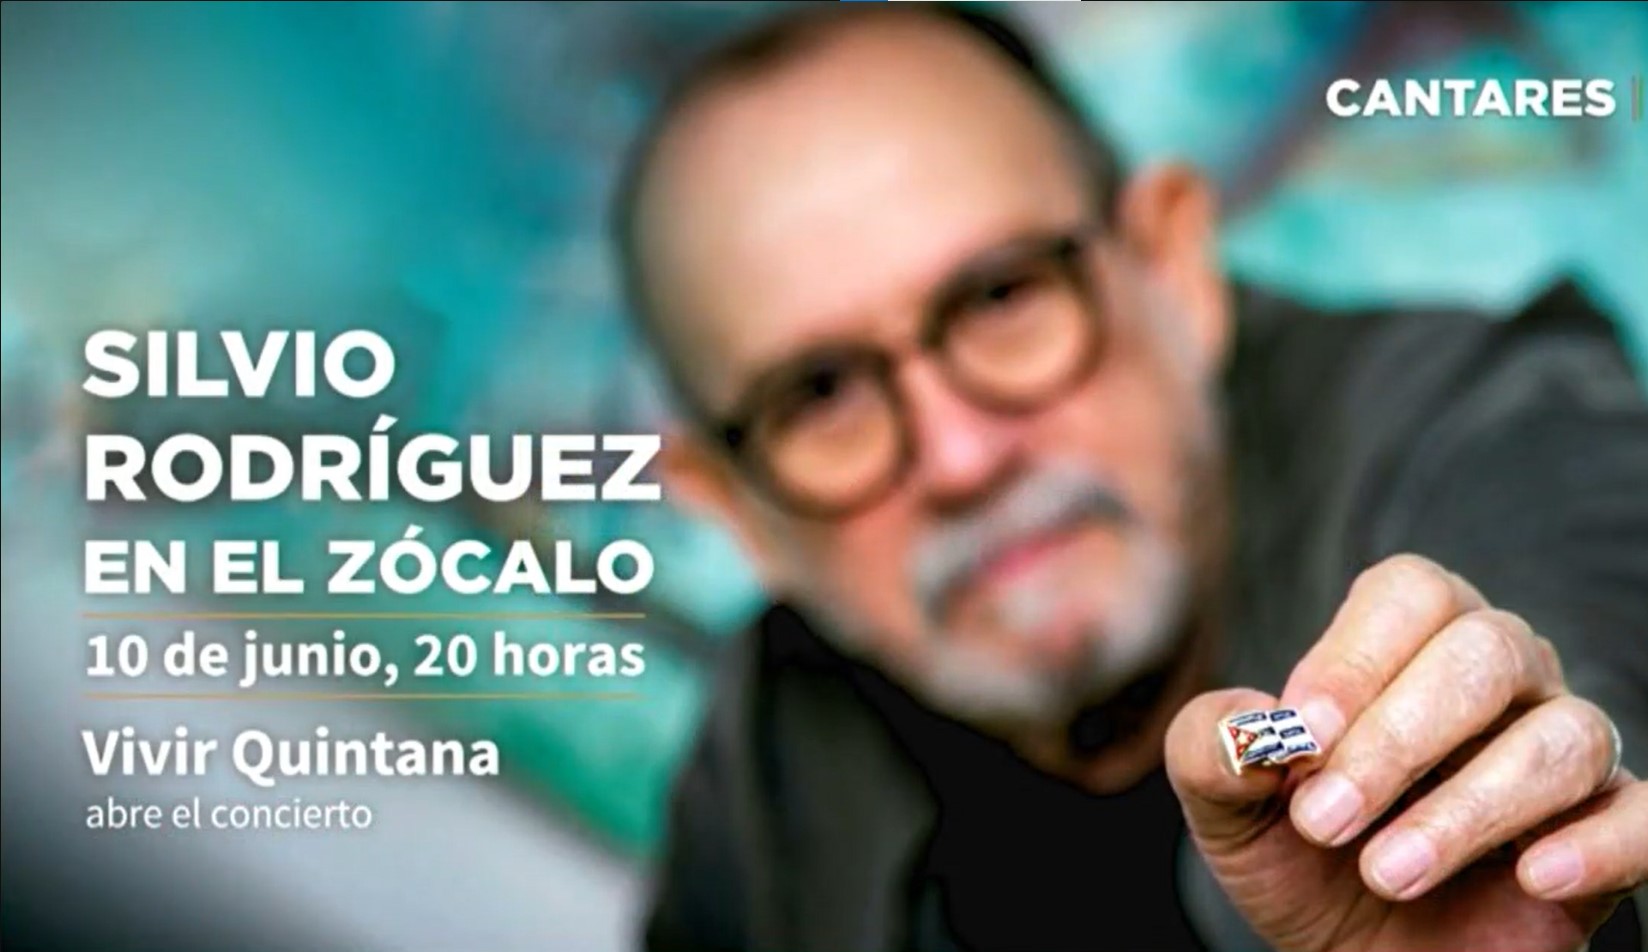   Silvio Rodríguez will be presented this June 10 at the Zócalo Capitalino (Photo: Twitter/@Claudiashein)